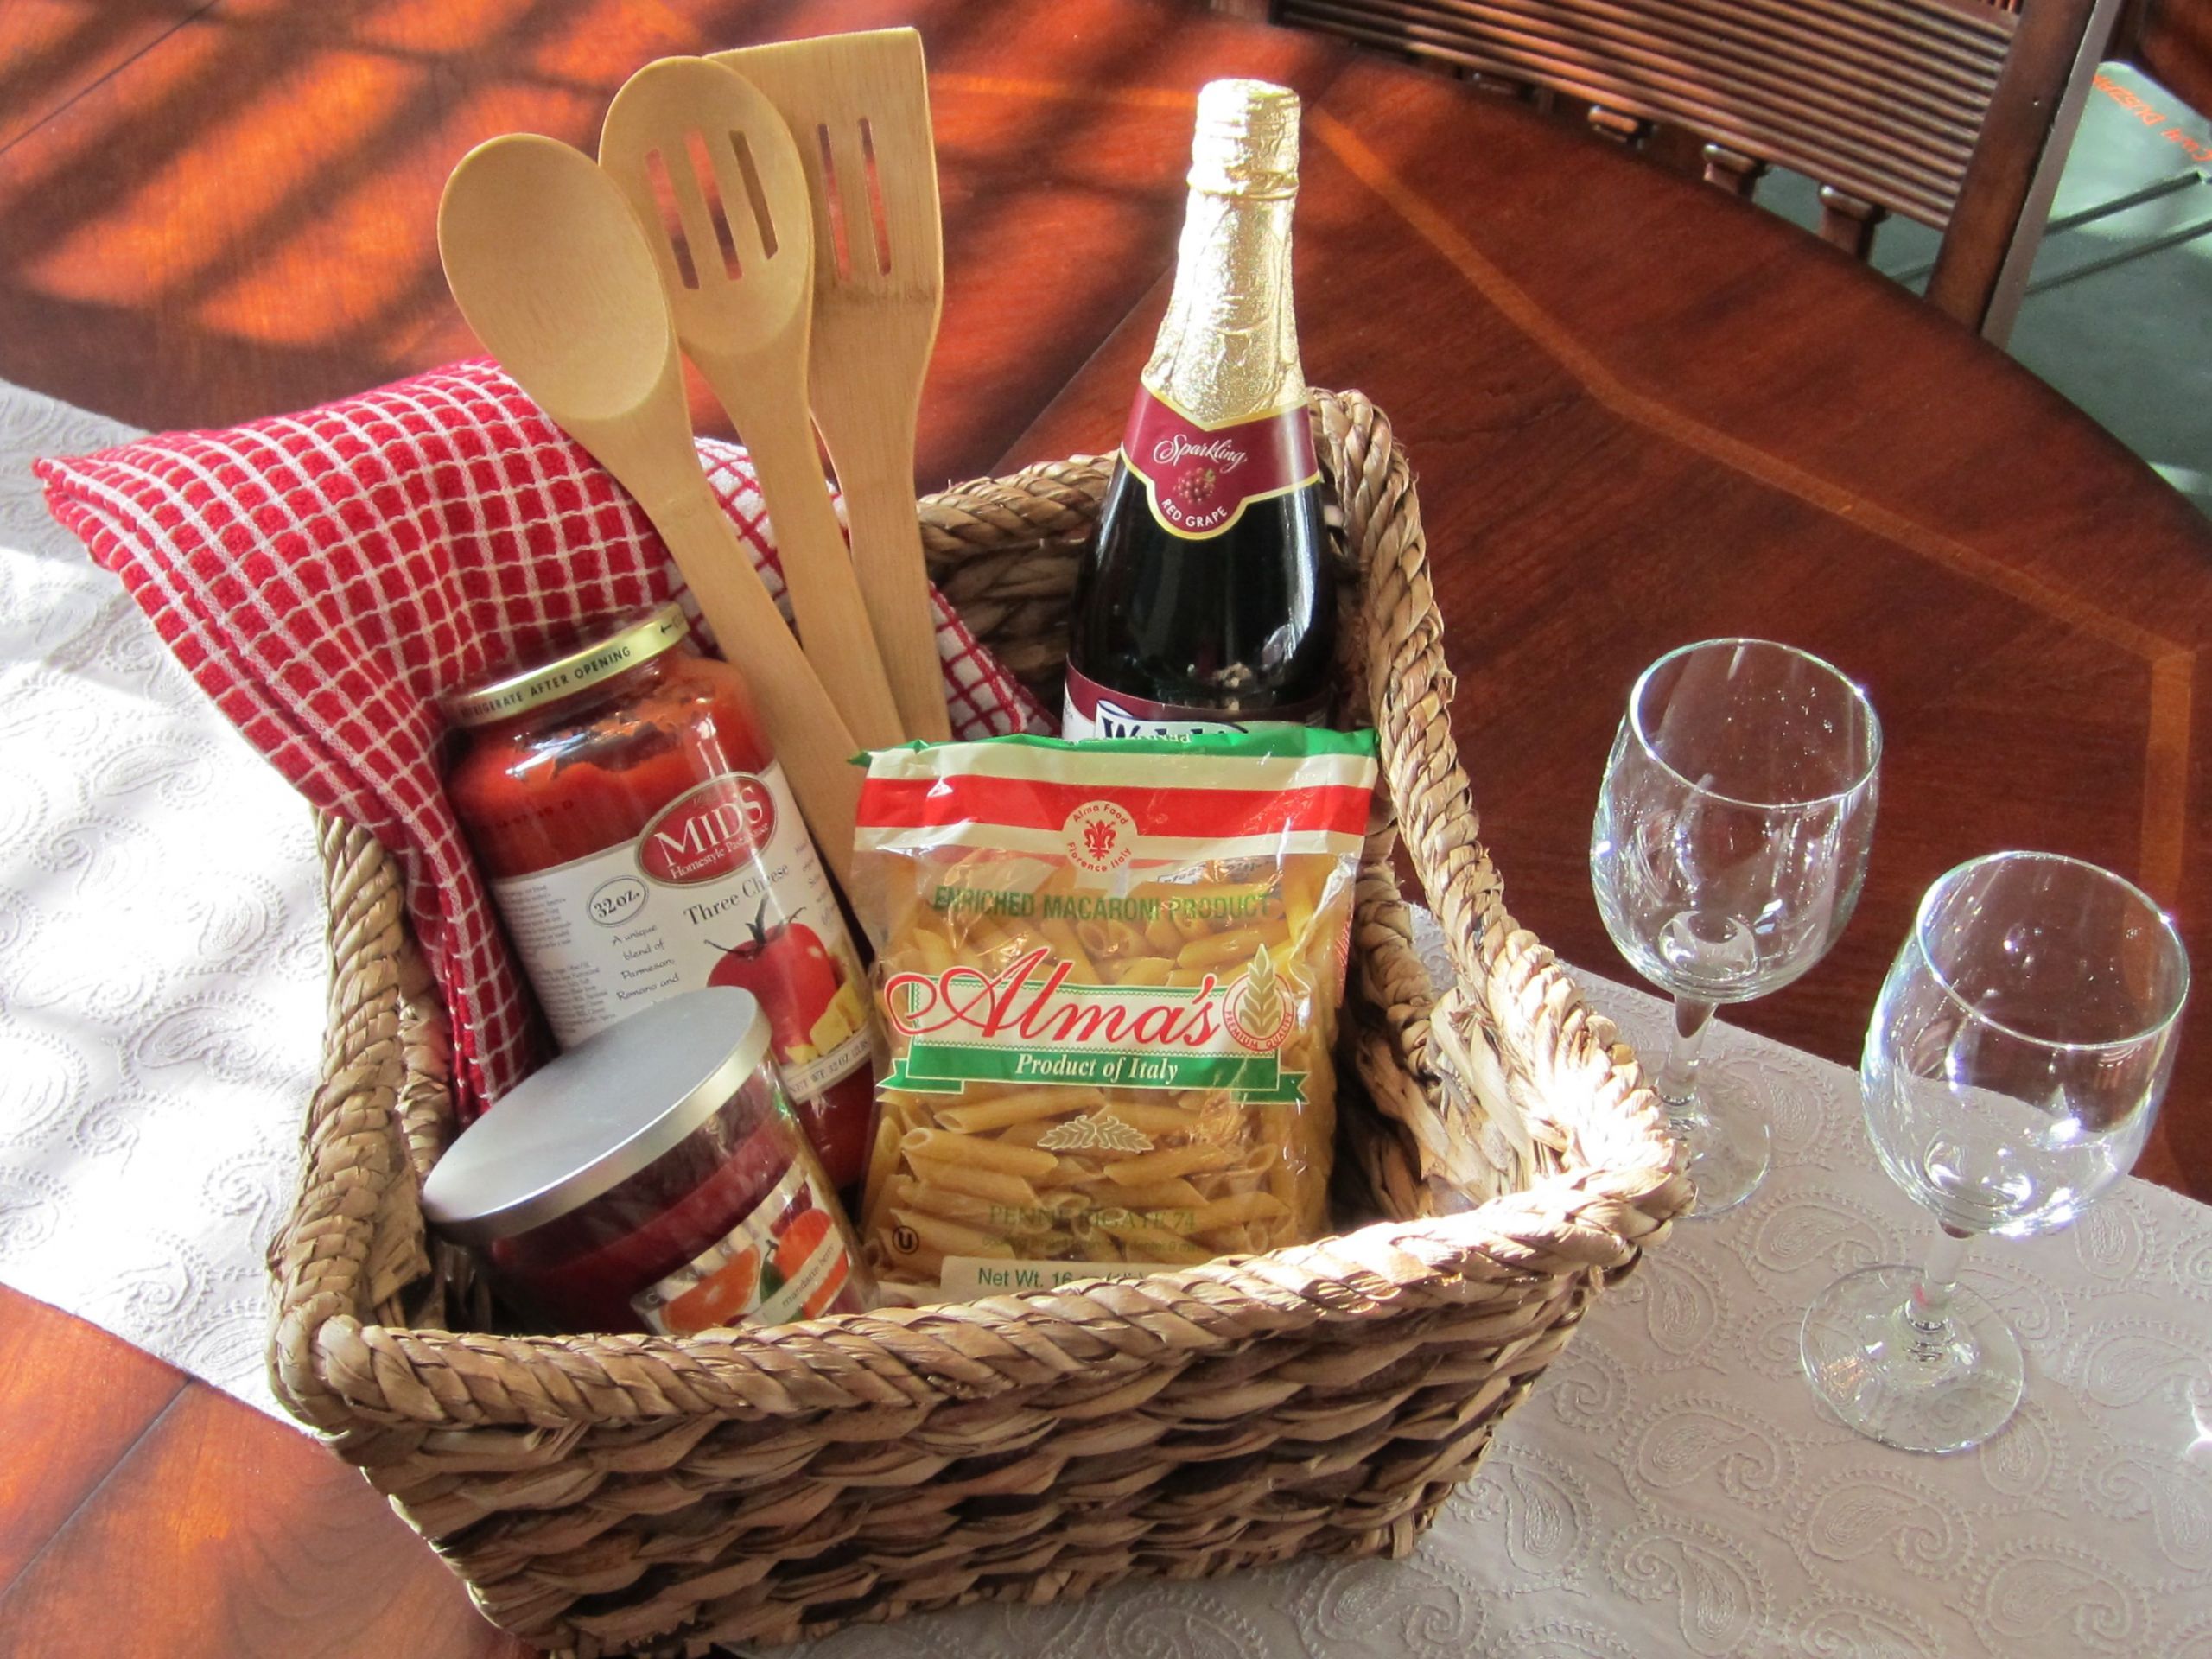 Italian Gift Basket Ideas
 Italian dinner for two t basket Add a baguette and a